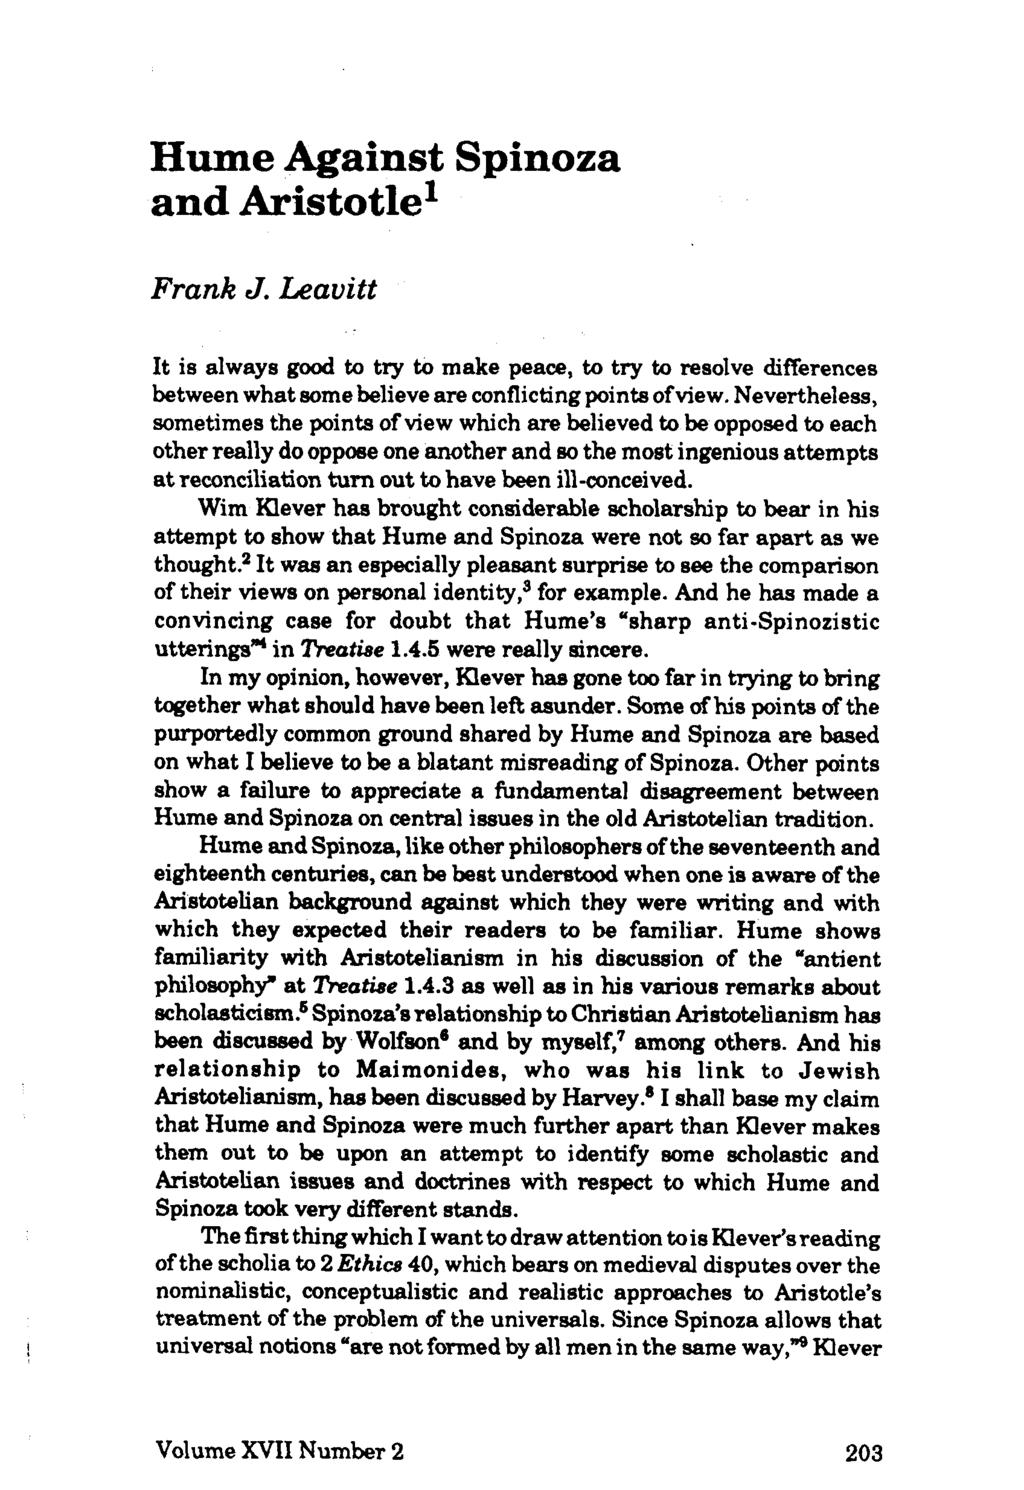 Hume Against Spinoza and Aristotlel Frank J. Leavitt! It is always good to try to make peace, to try to resolve differences between what some believe are conflicting points ofview.